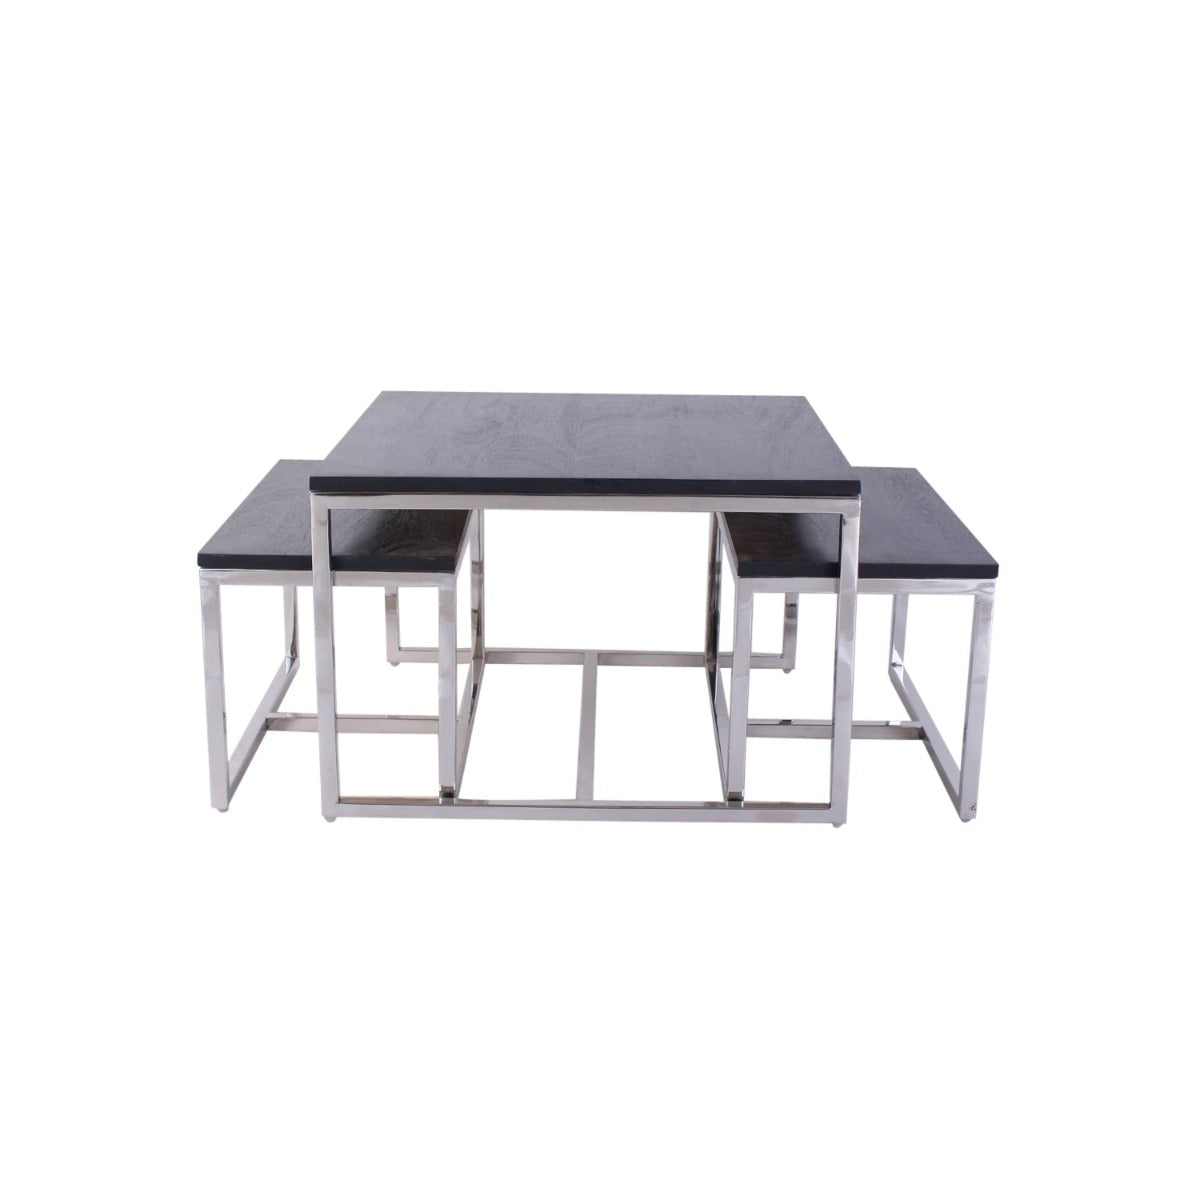 Sinco Nesting Coffee Table In Chrome Finish (Set Of 3)